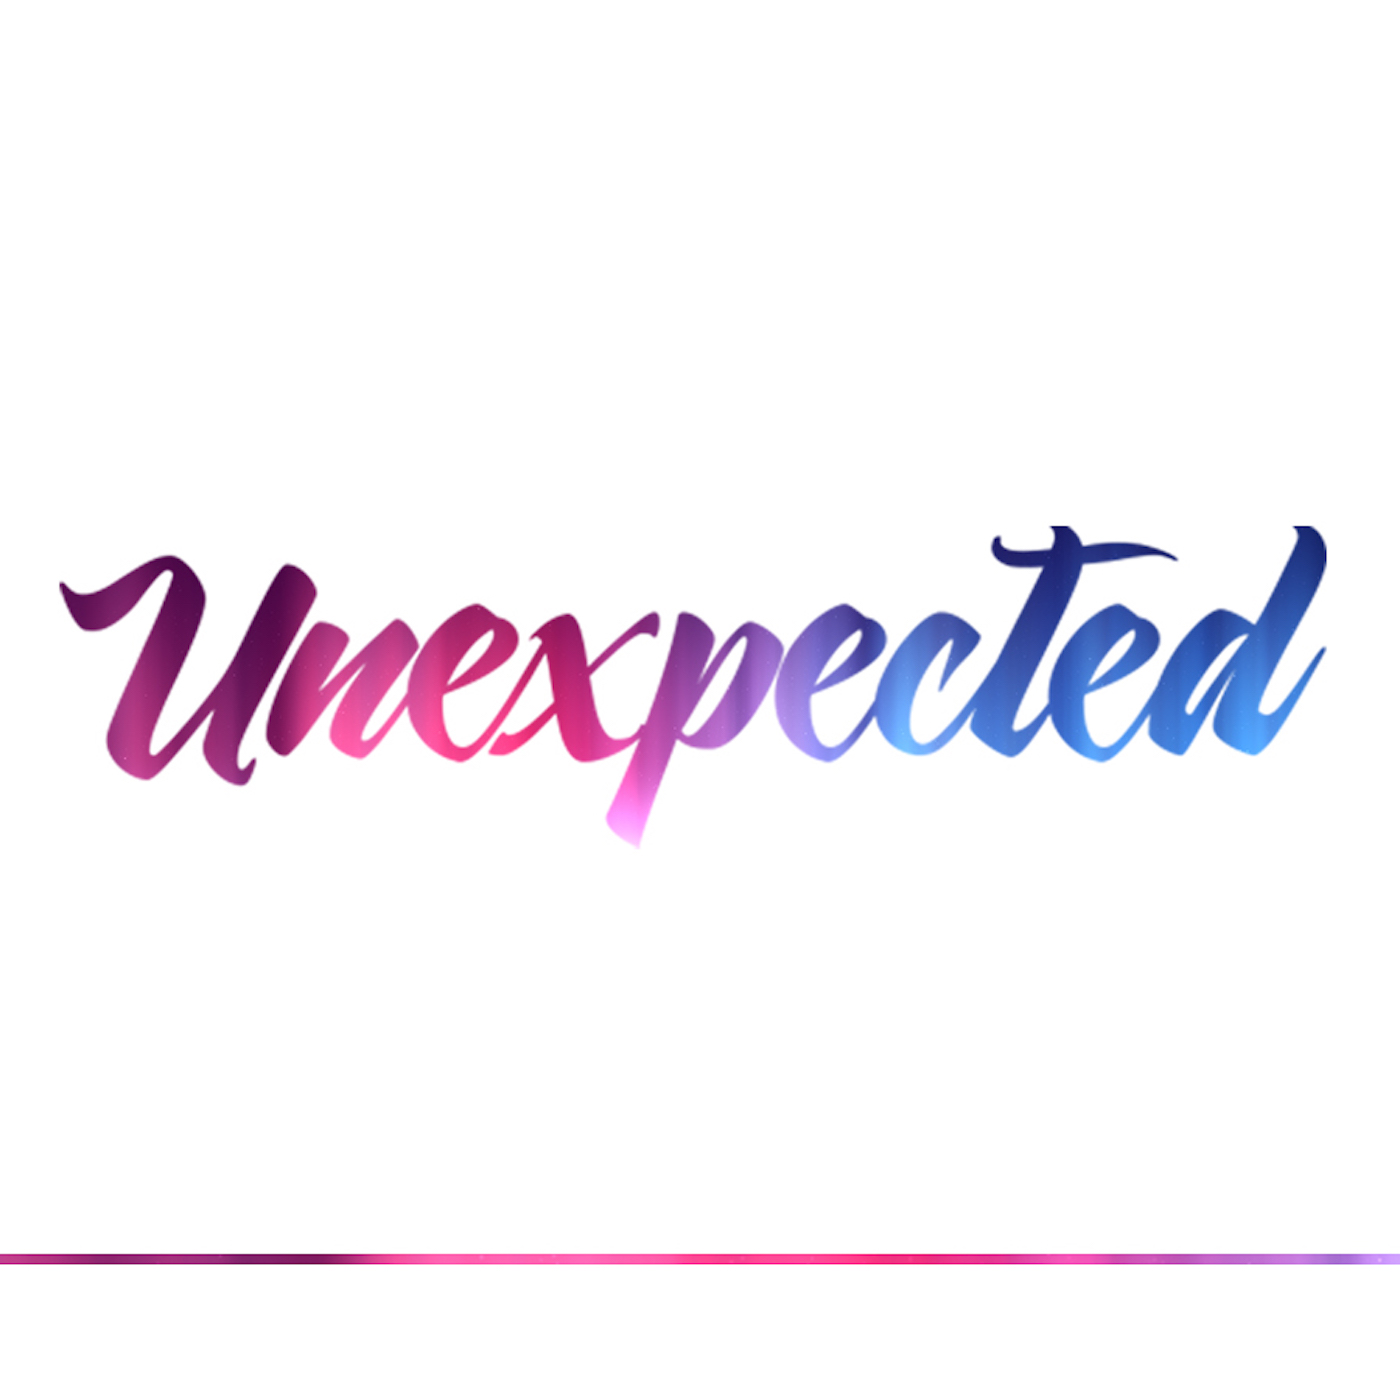 Unexpected - Week 3